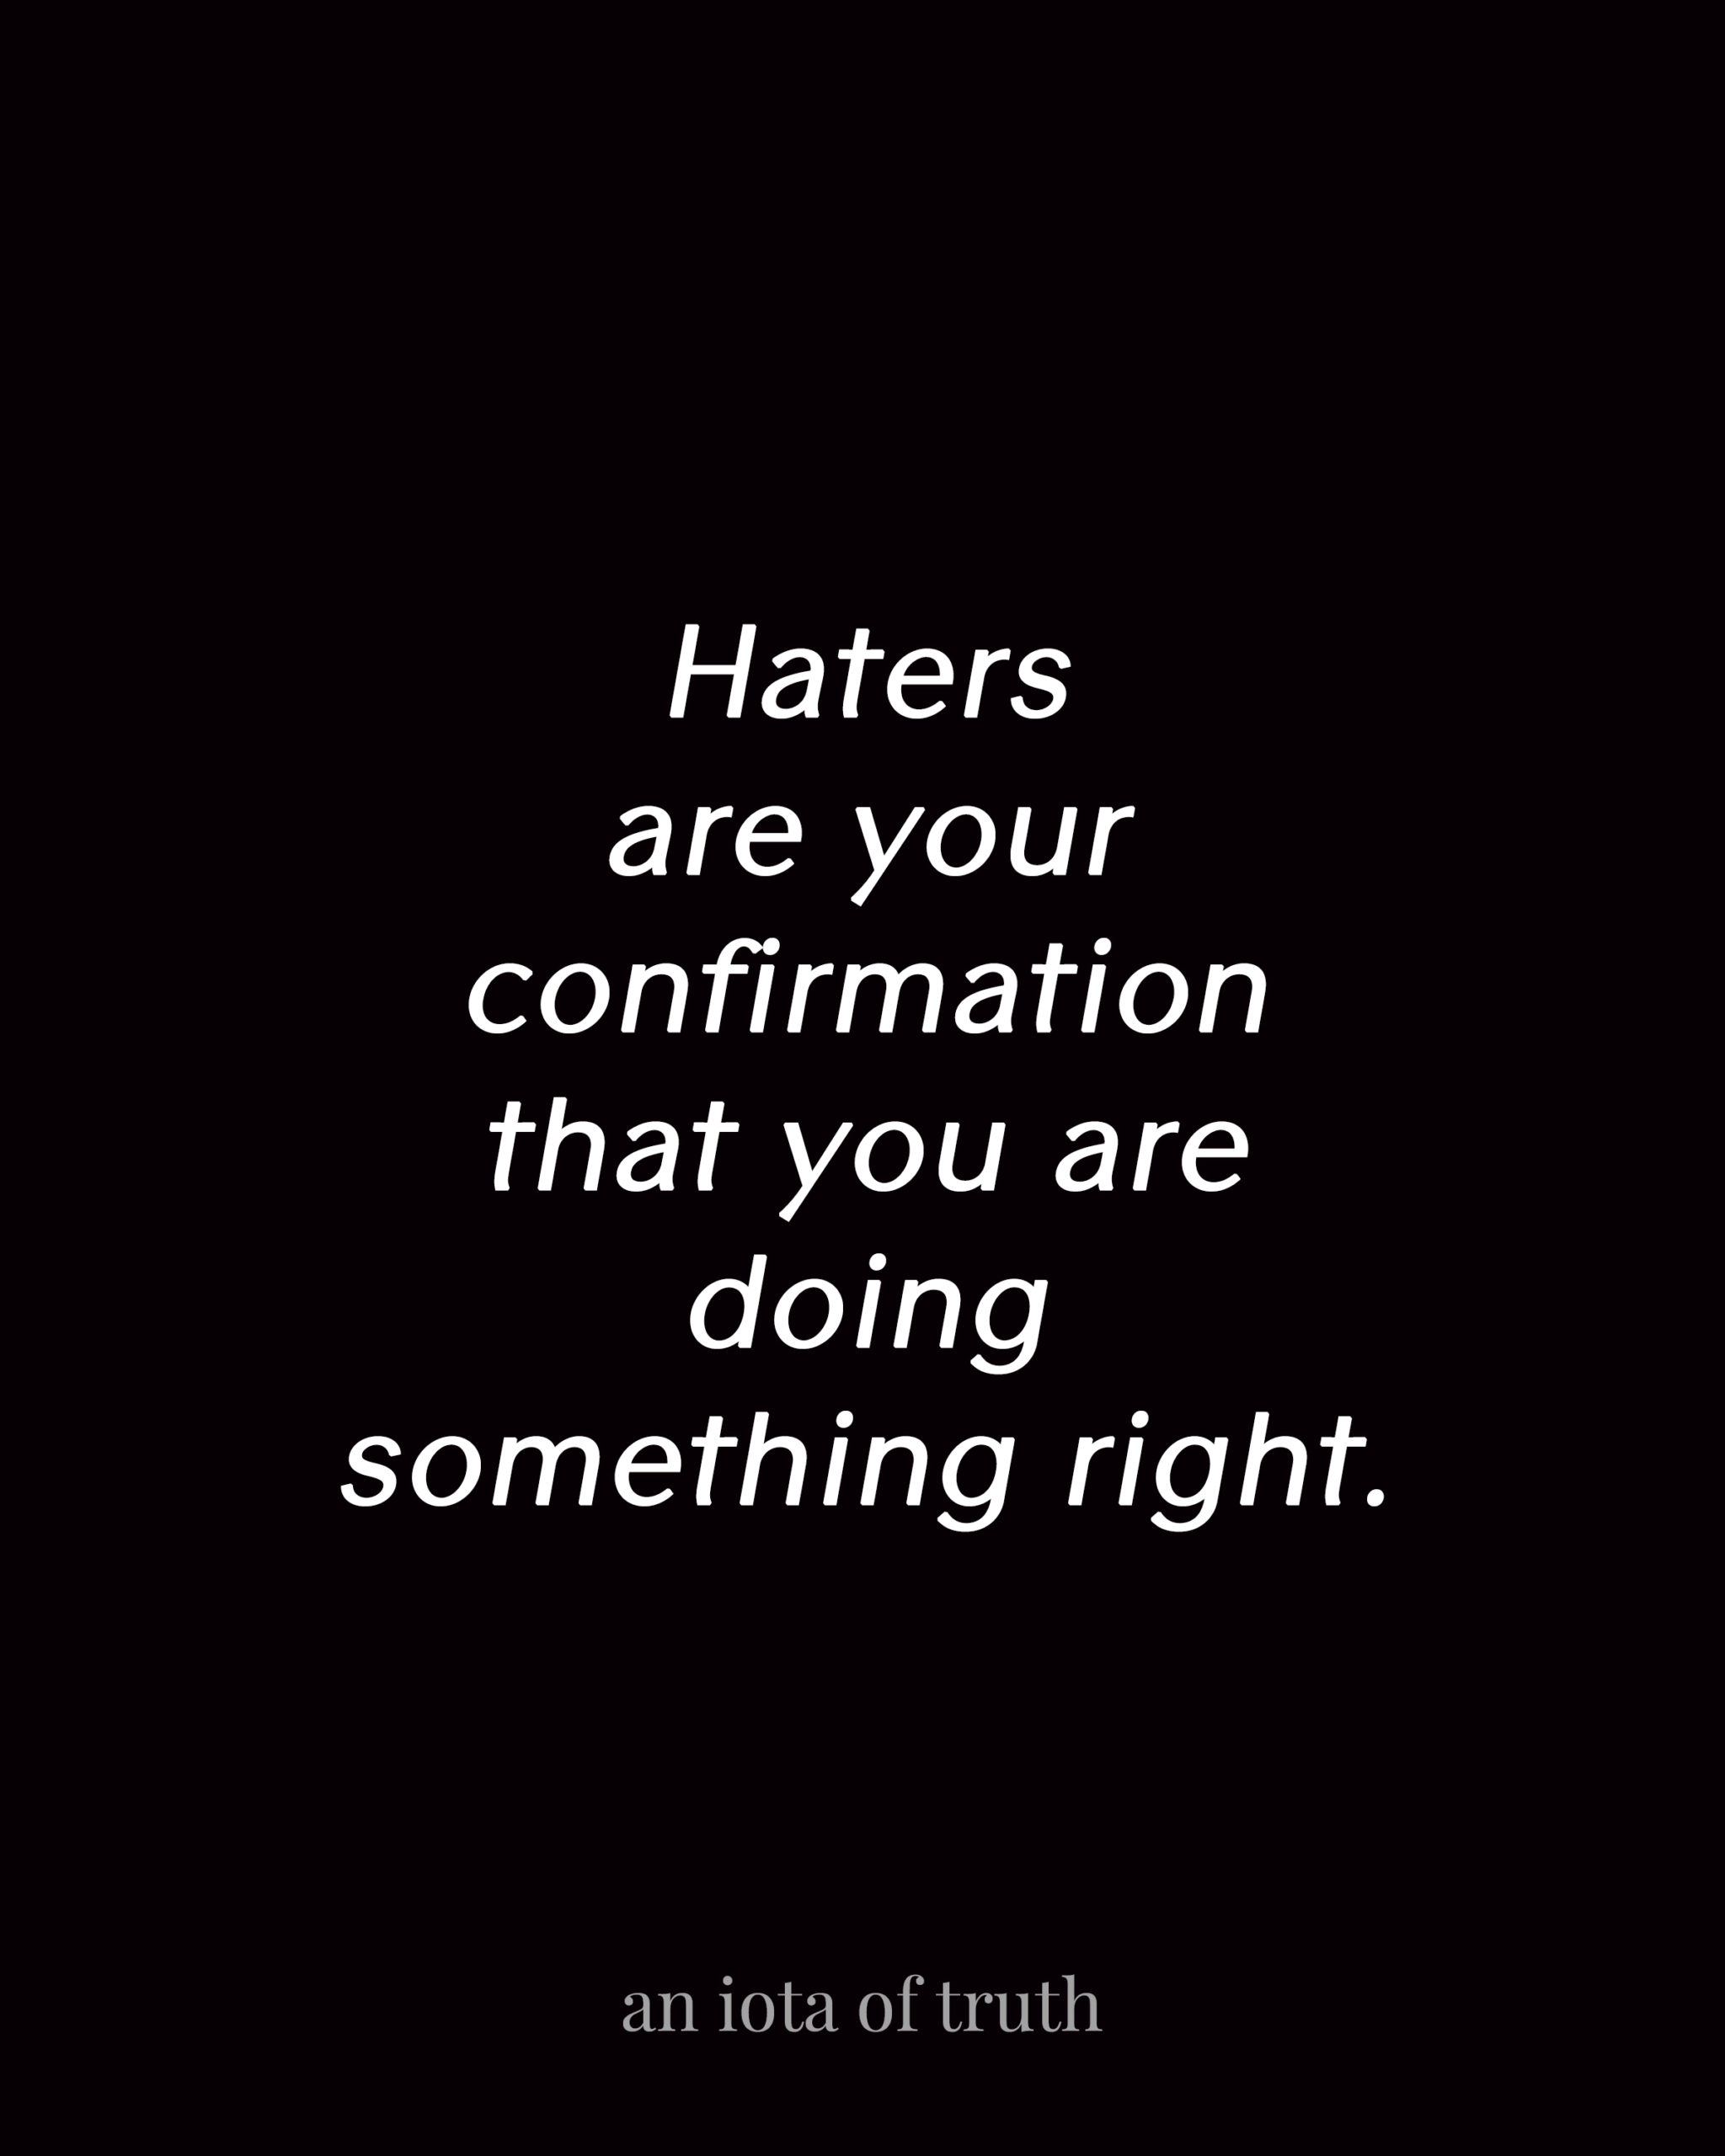 Haters are your confirmation that you are doing something right.